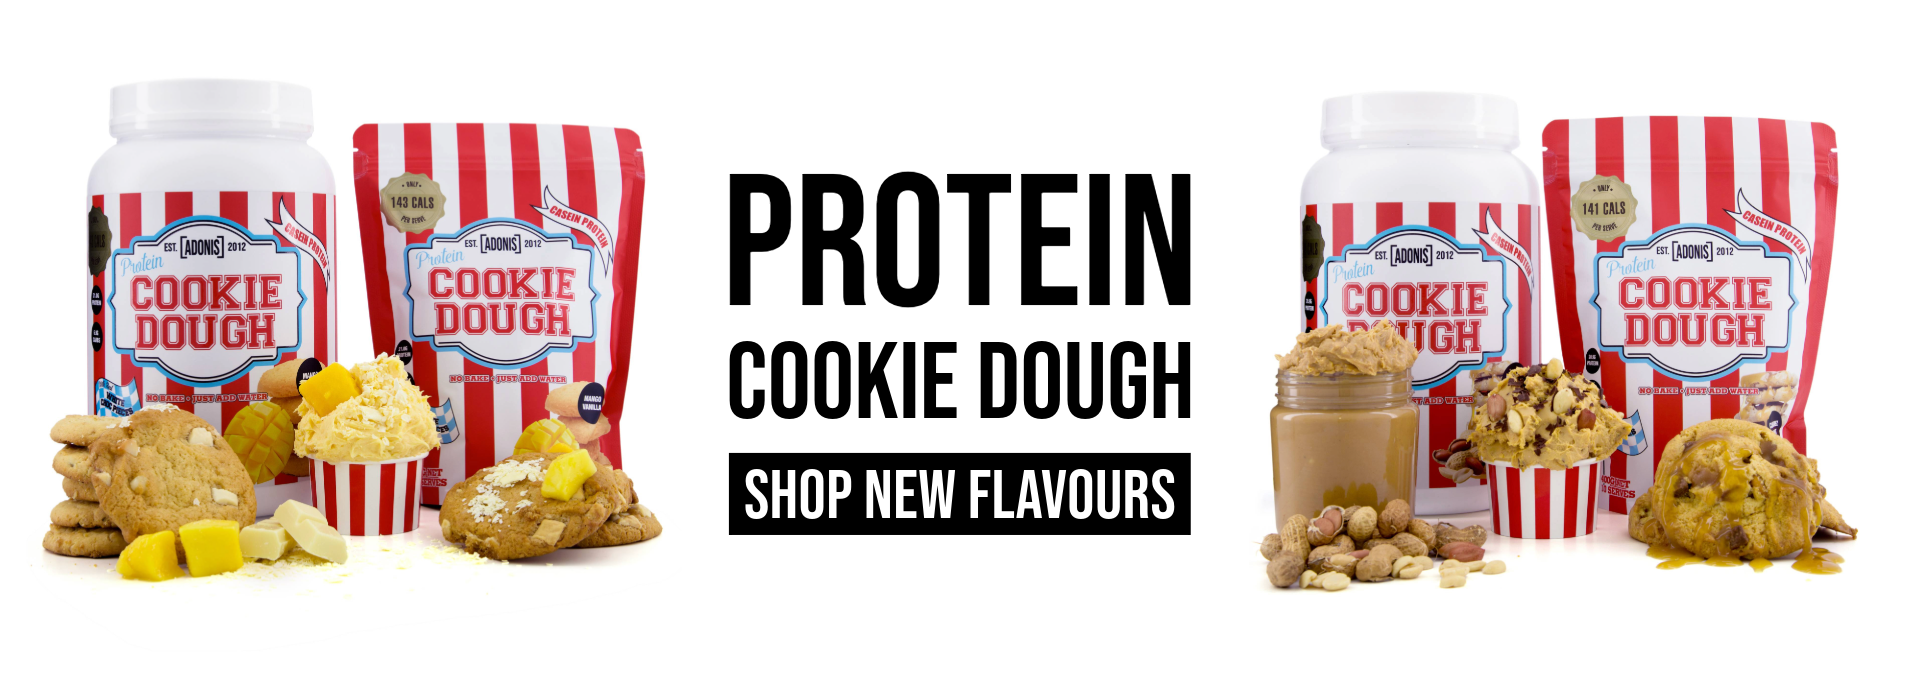 New Protein Cookie Dough Flavours